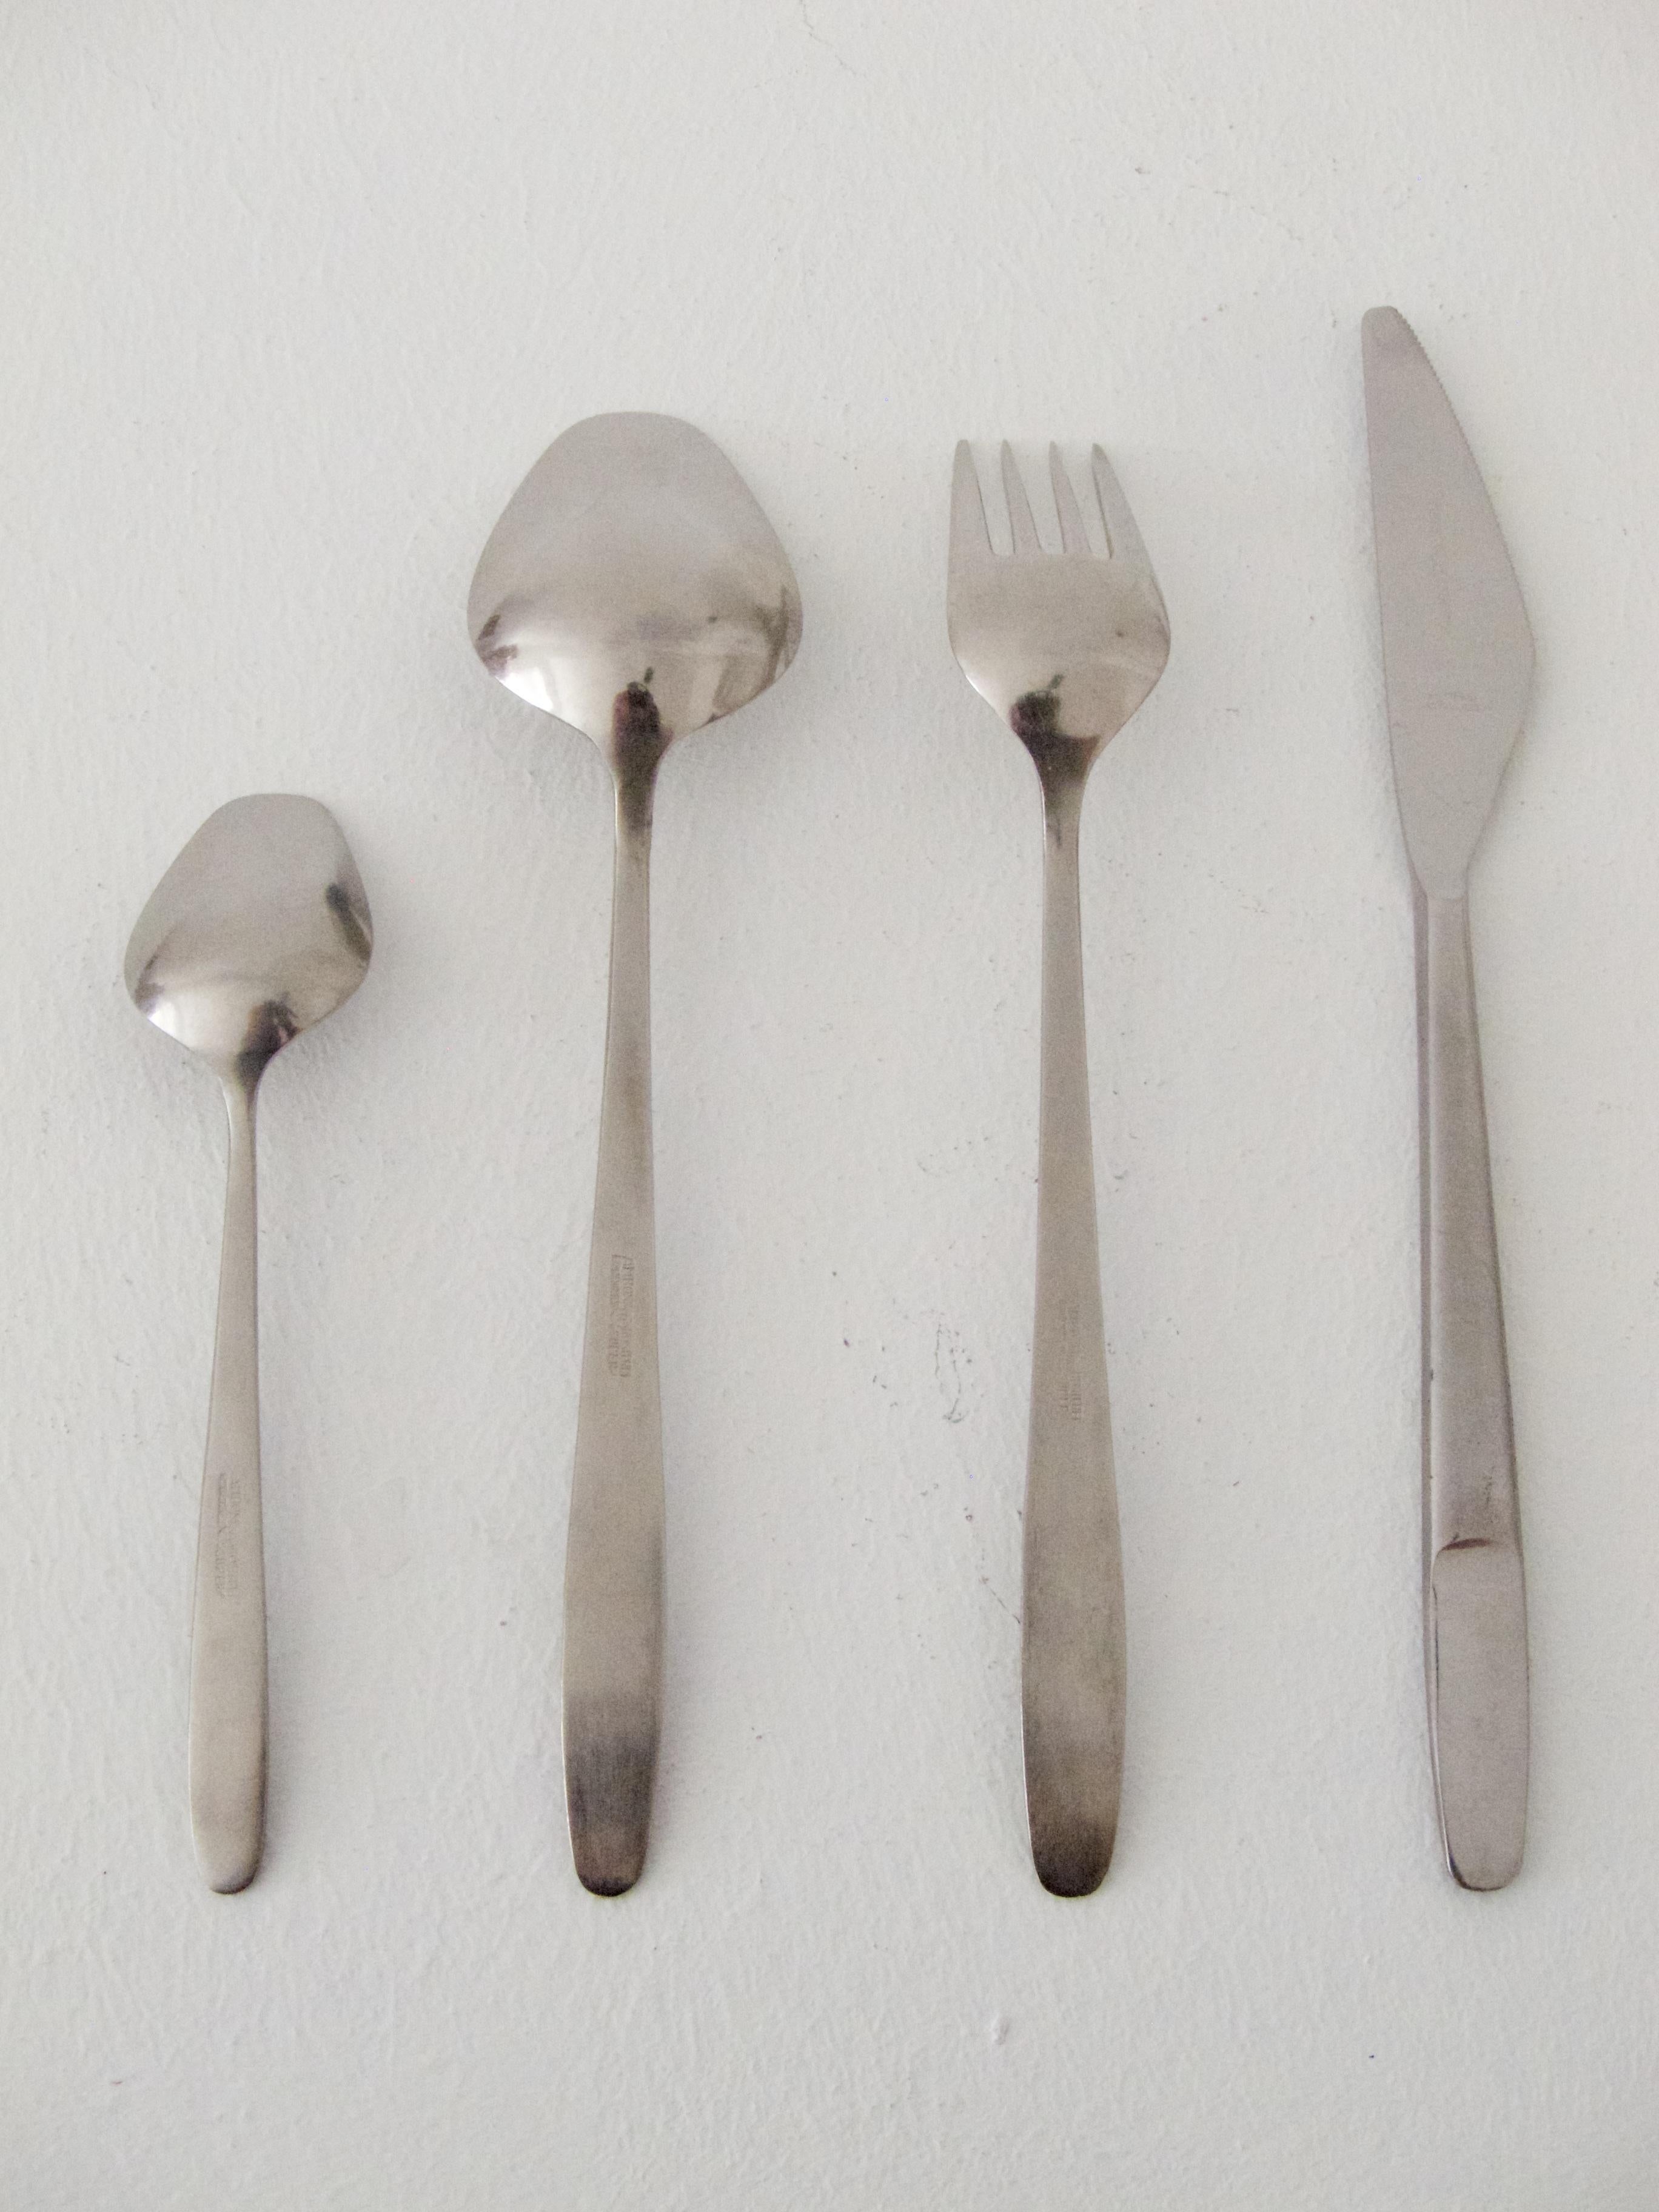 Flatware Amboss Austria Mod. 2070
Designed 1960s by Dipl. Ing. H. Alder

For 6 persons, 24 pieces

Marked: Amboss Logo, AMBOSS, ROSTFREI, AUSTRIA STAINLESS, 